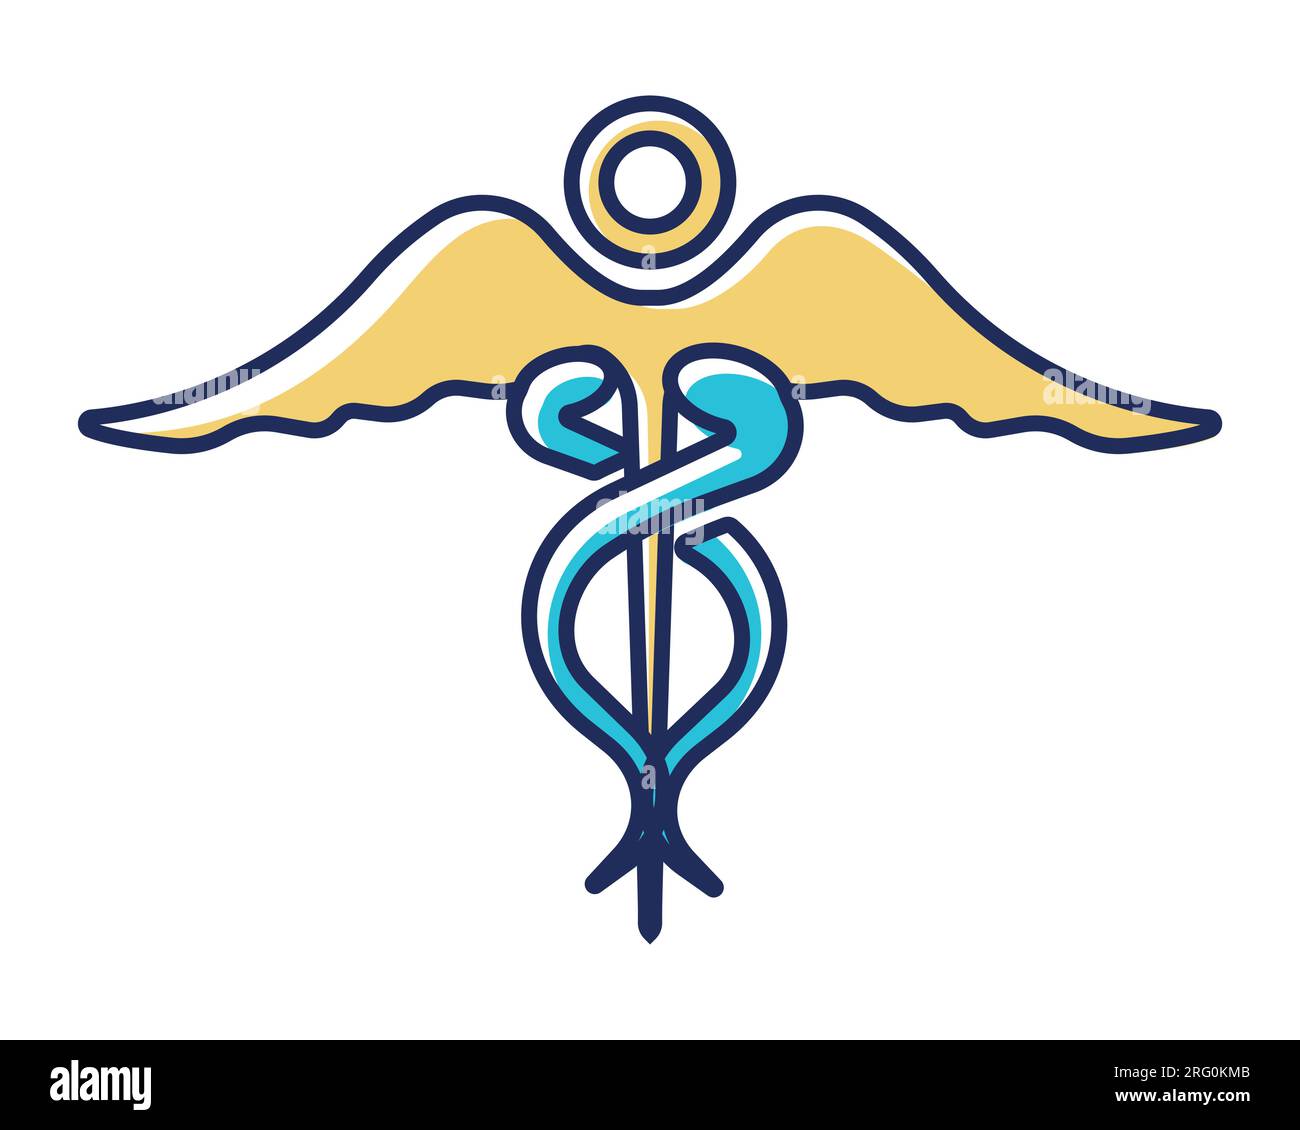 caduceus medical symbol icon over white background colorful design vector illustration Stock Vector